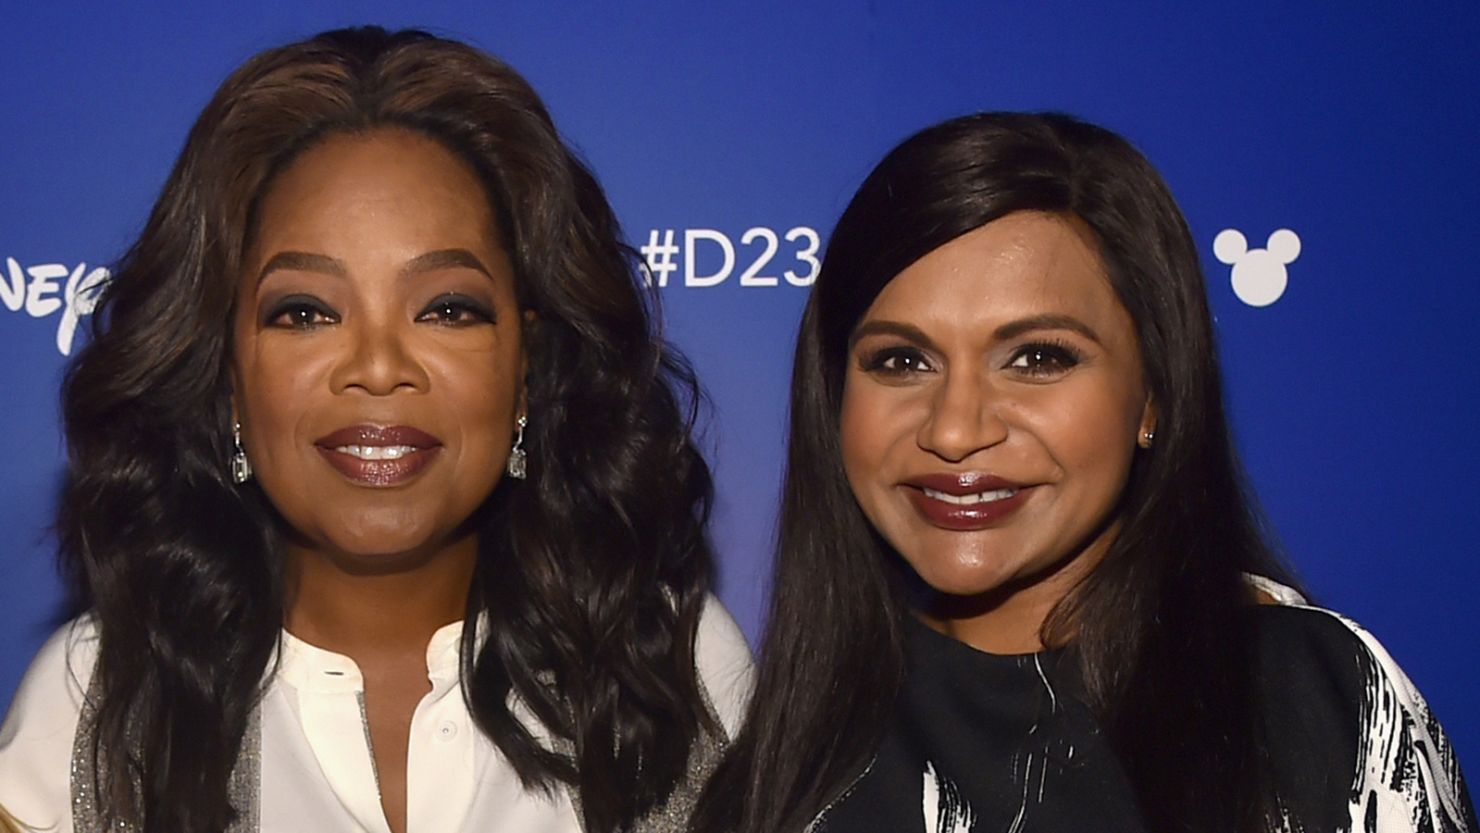 Oprah Winfrey gave a generous gift to the newborn of her "A Wrinkle In Time" costar, Mindy Kaling.